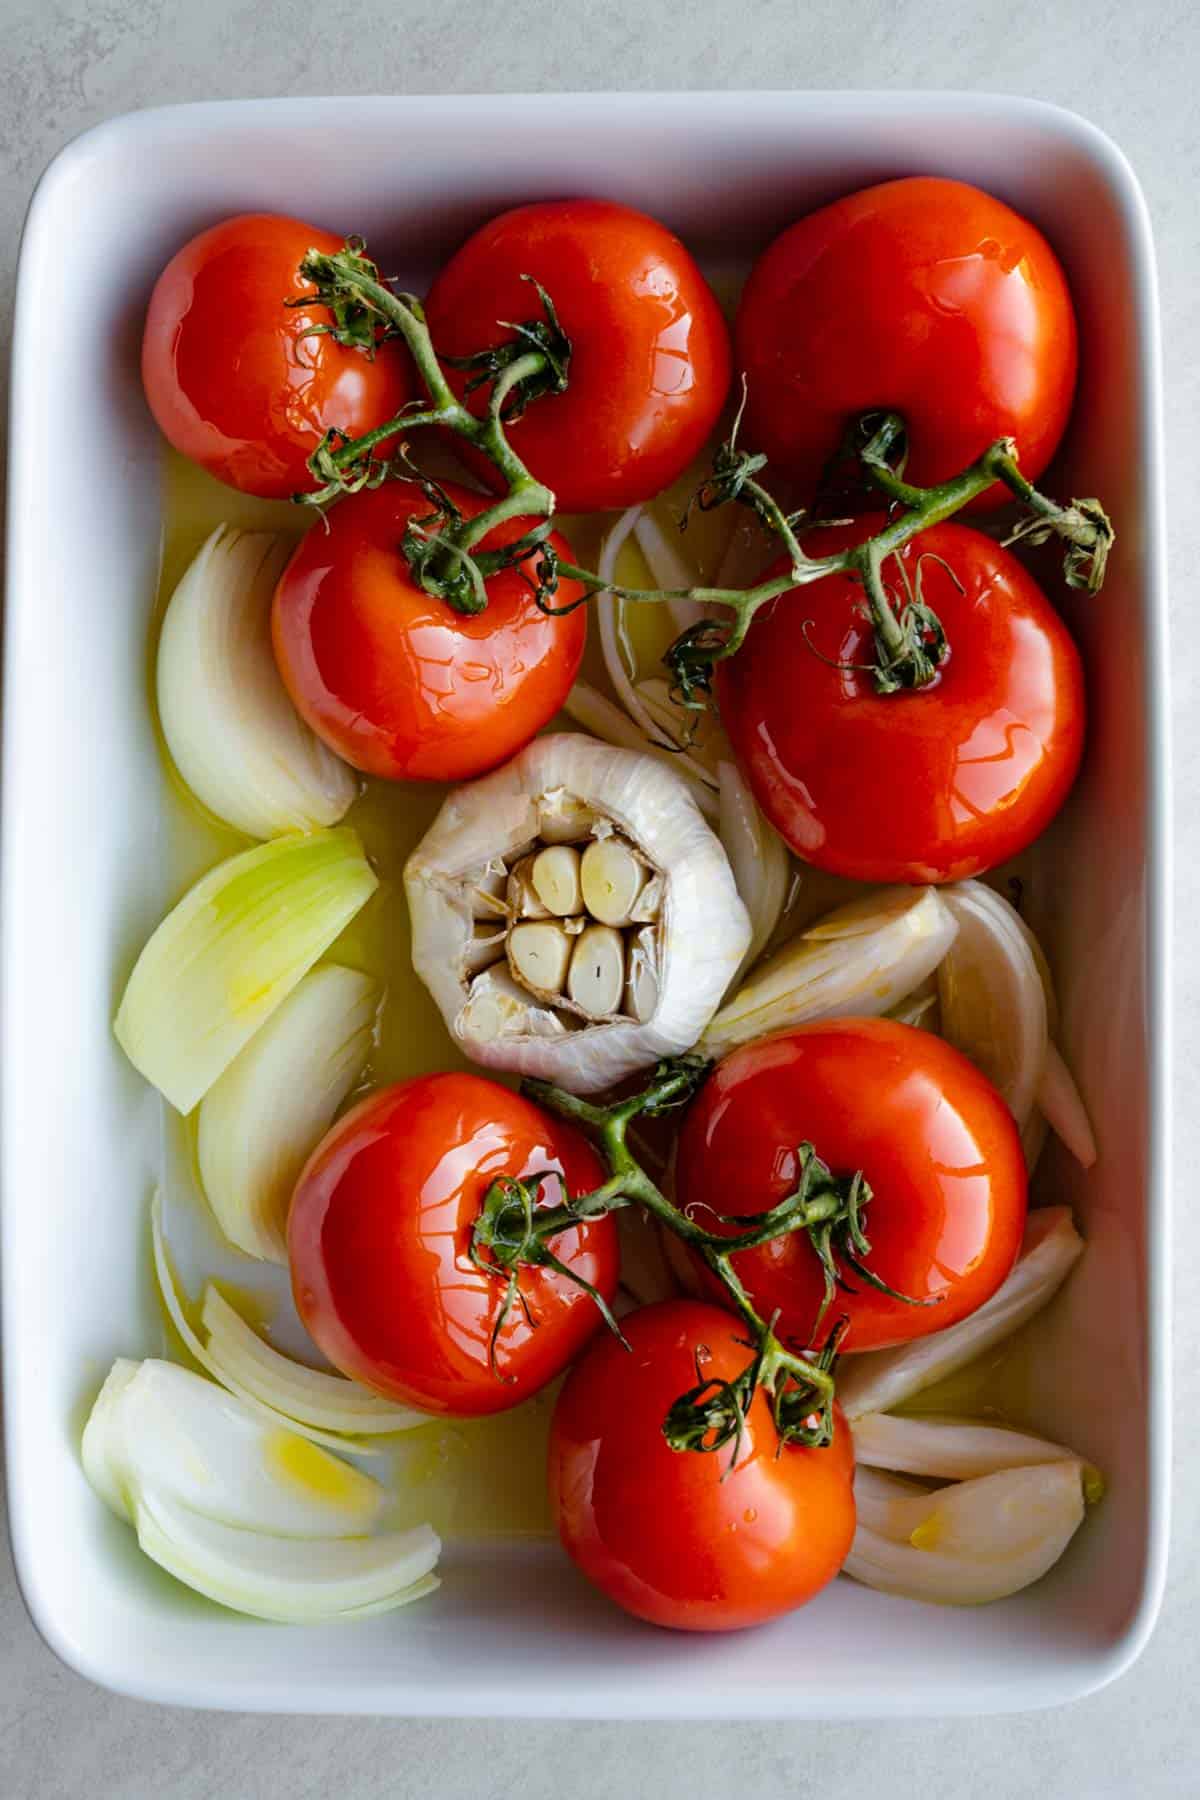 Eight vine tomatoes, chopped onion, and a head of garlic in a white baking dish with olive oil.